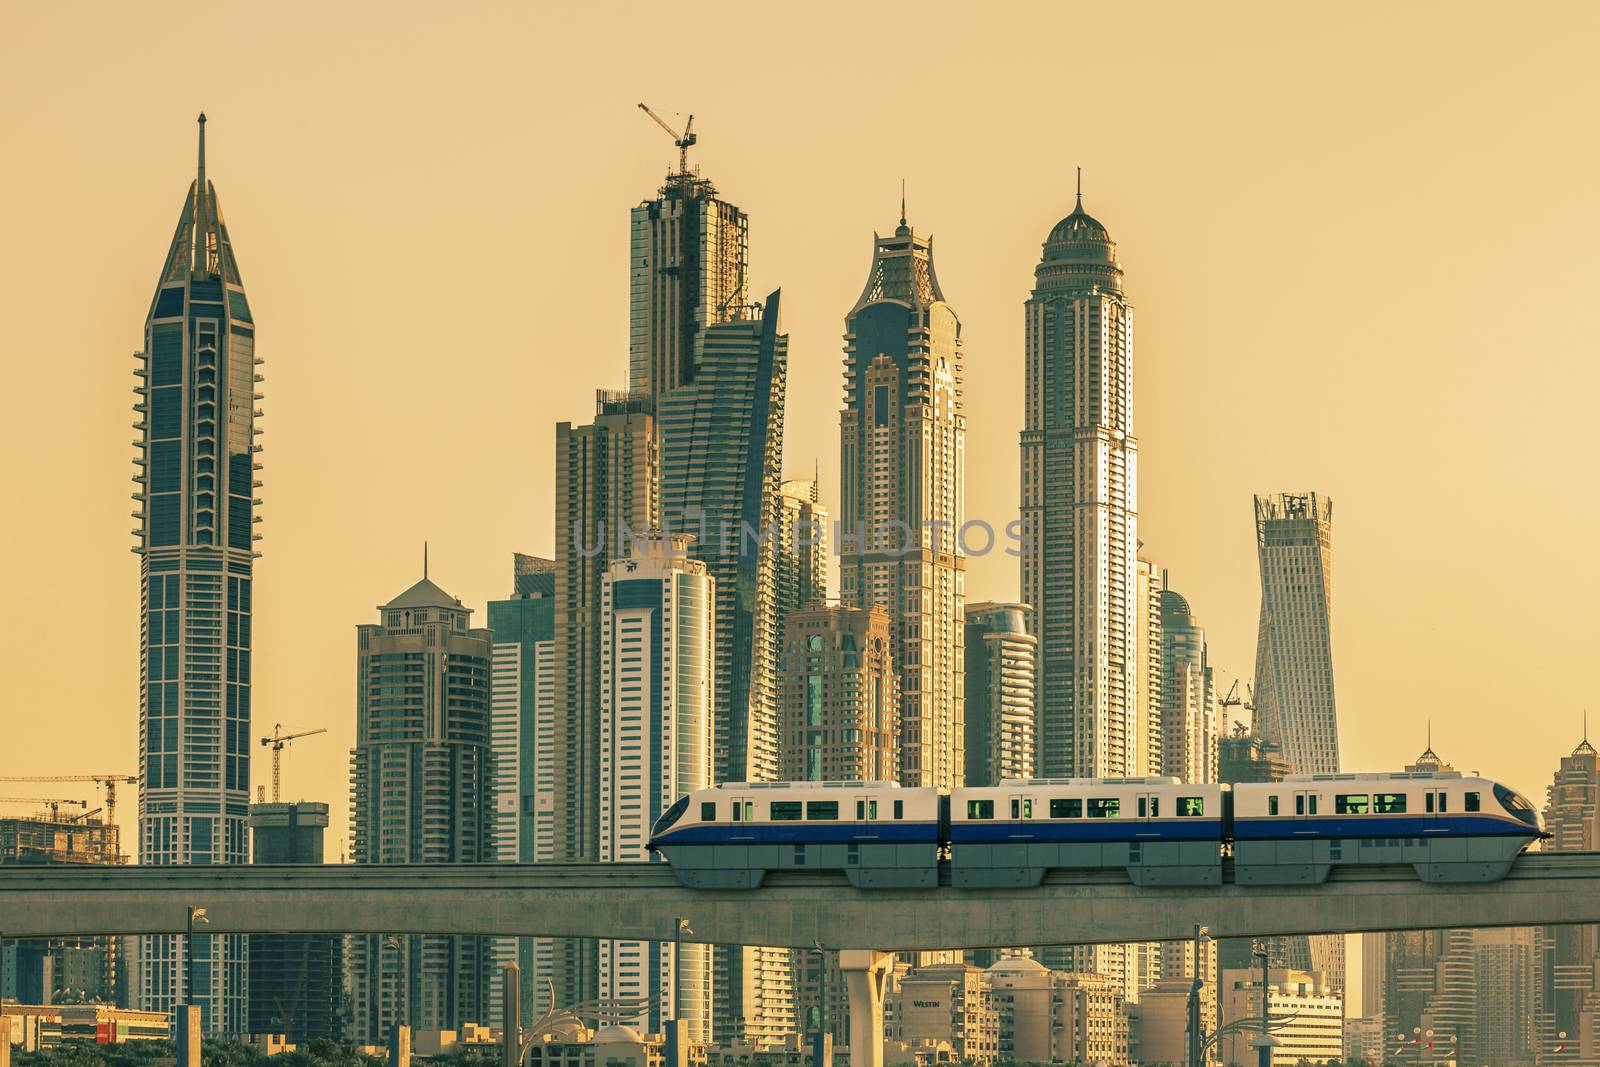 Dubai with subway and skycrapers at sunset. by vwalakte